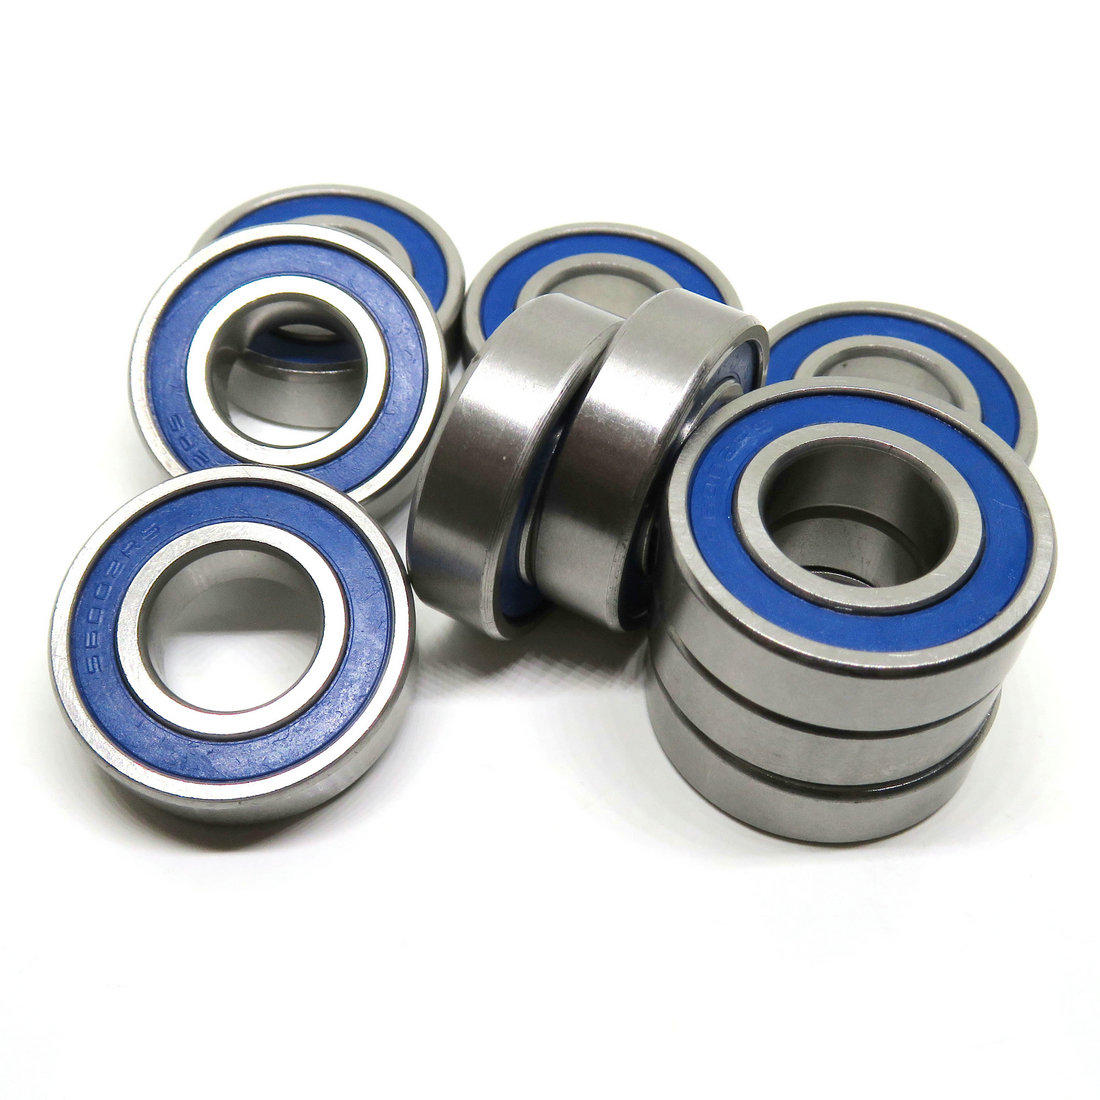 High resistance to corrosion S6002-2RS Stainless Steel Ball Bearing Sealed 15x32x9 S6002 RS